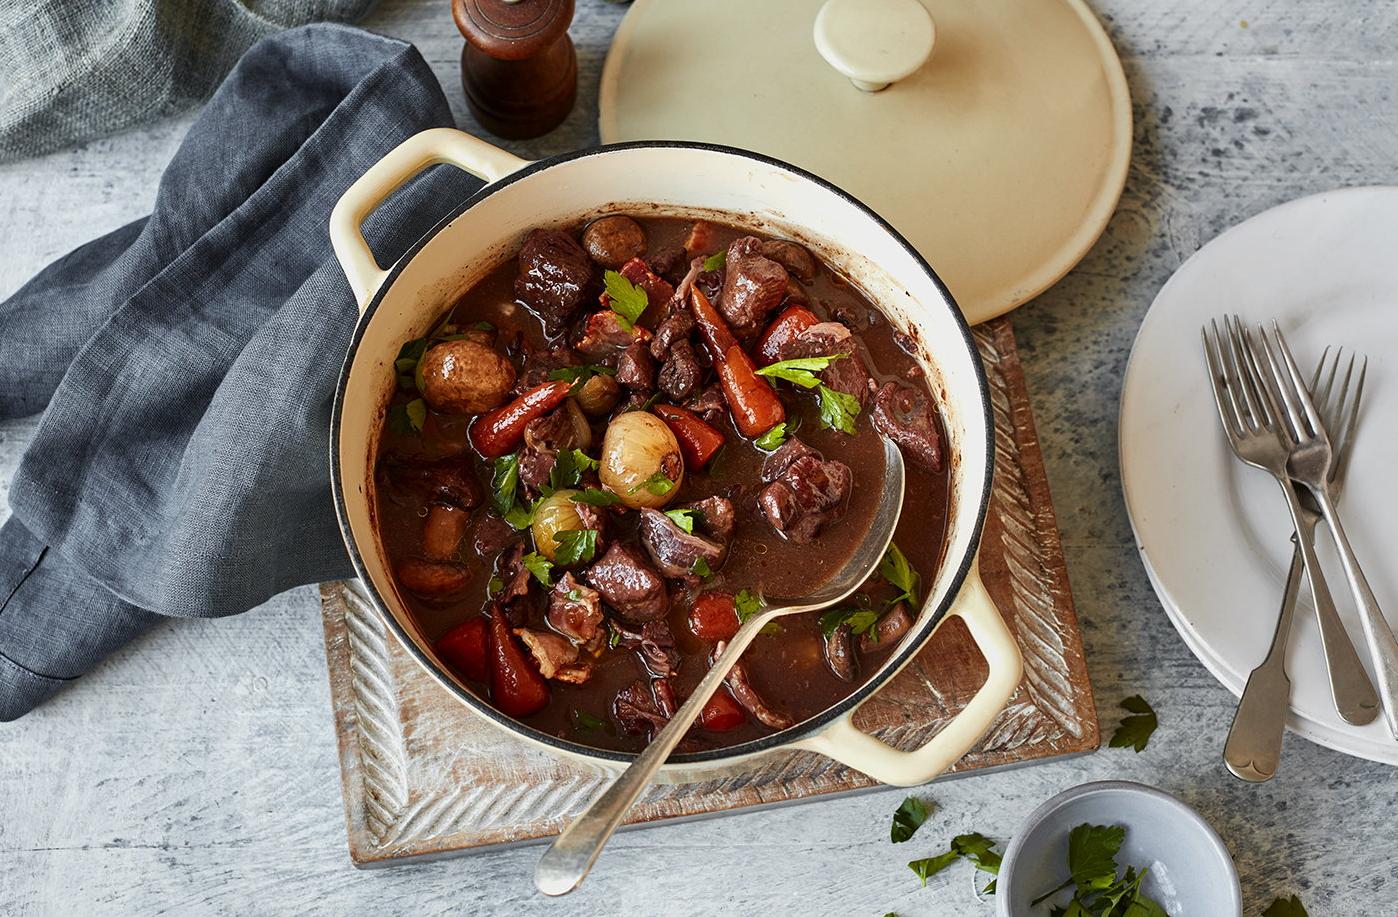  Letting the beef simmer low and slow in wine makes for a luxurious and tender meal